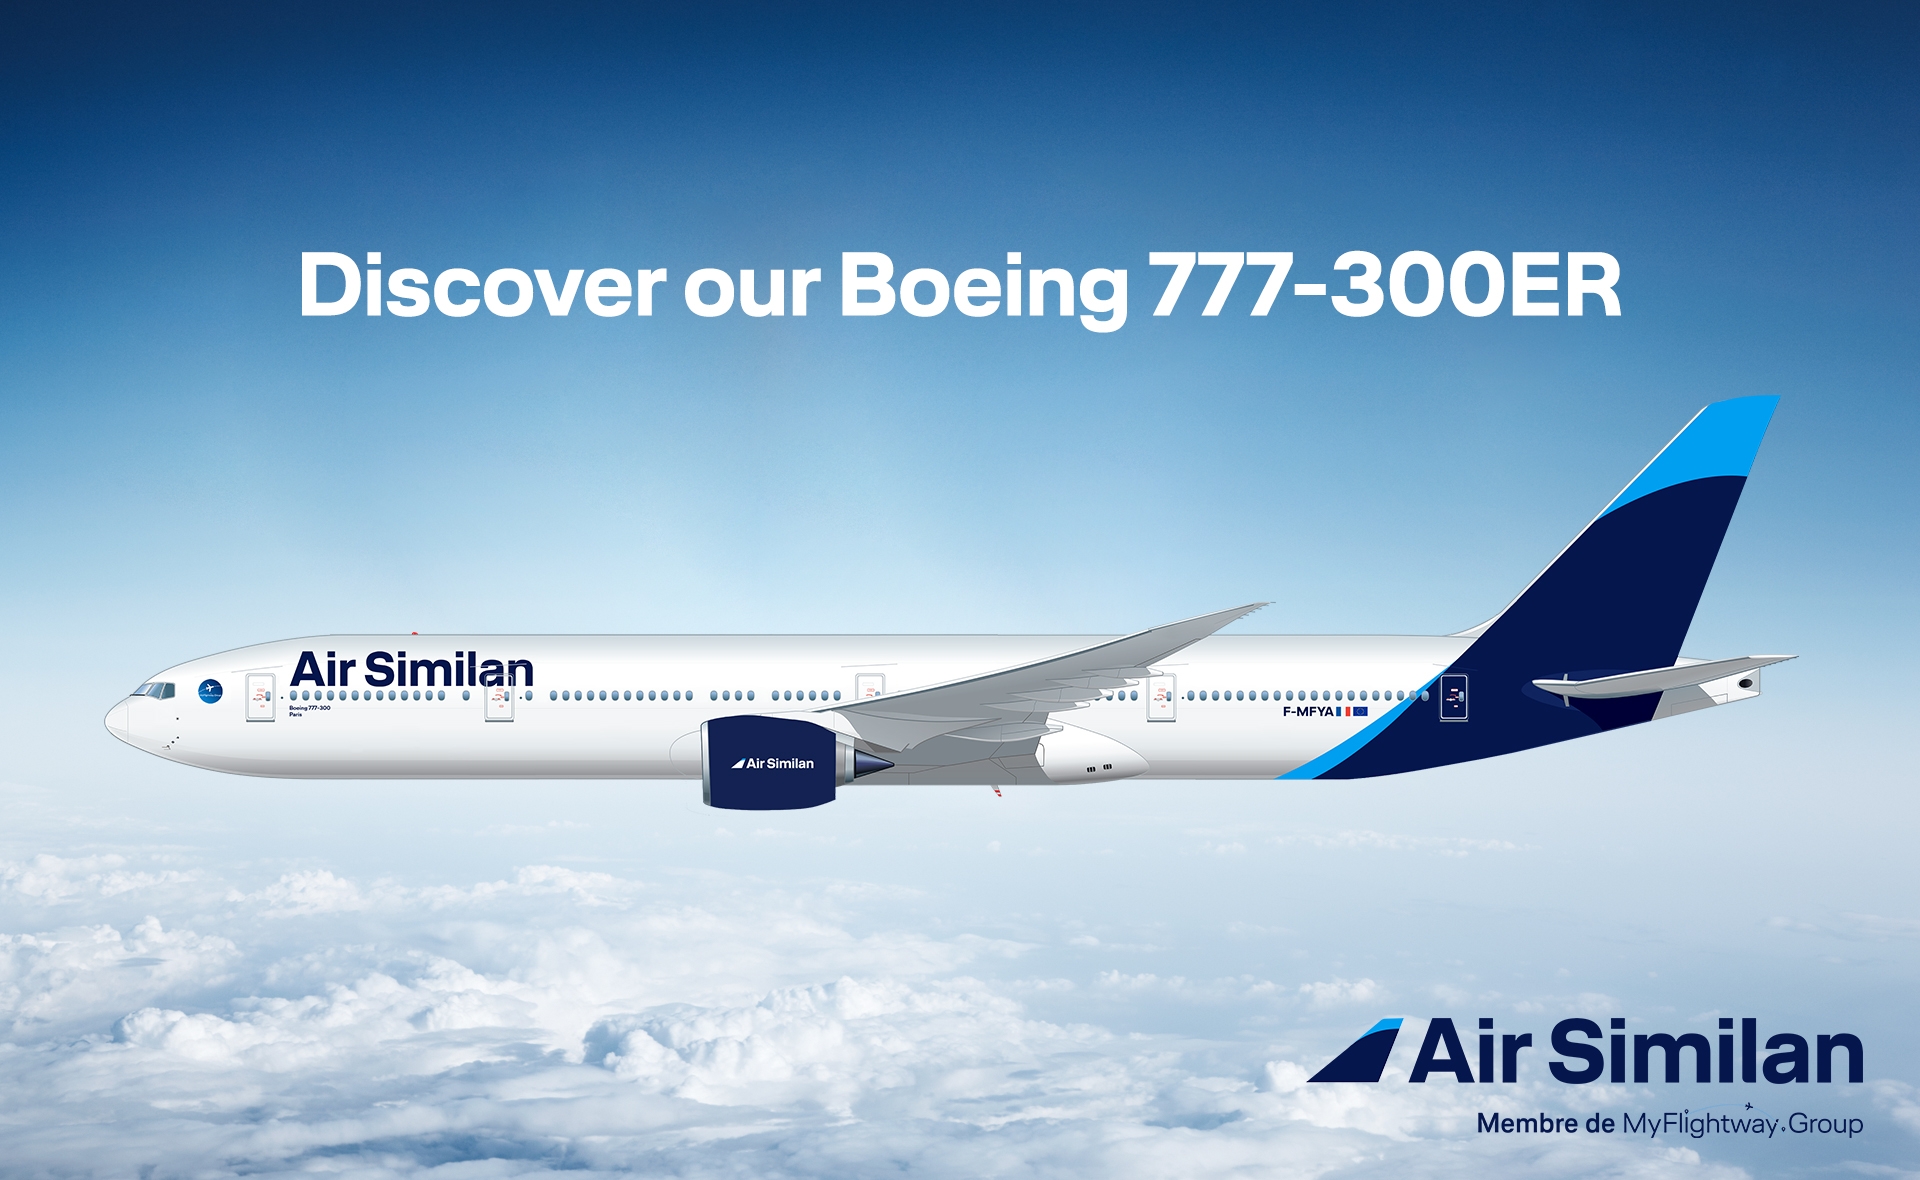 Air Similan places order for 2 Boeing 777-300ER